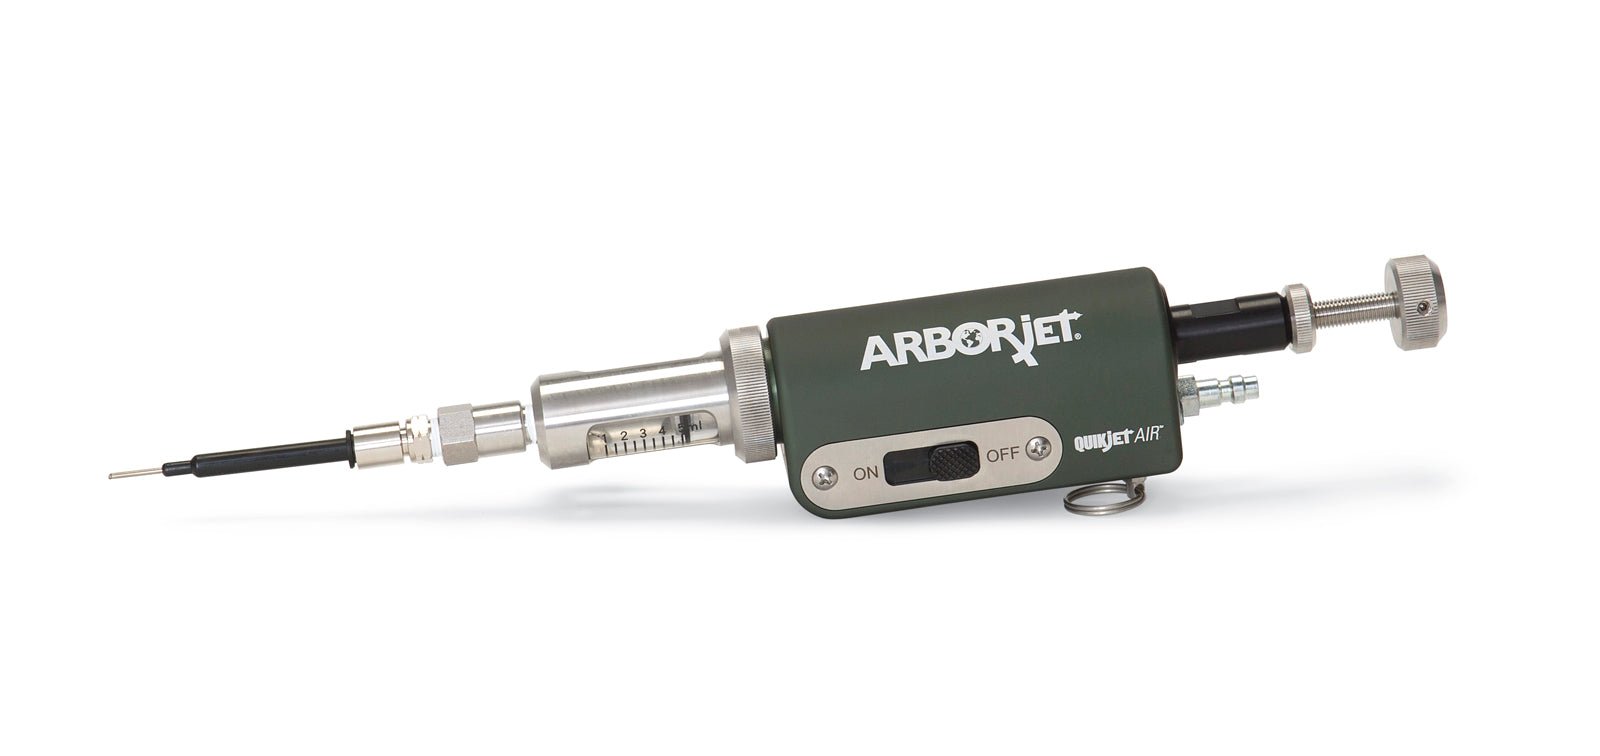 ArborJet QUIK-jet Air Kit - Tree Injection Products Co.